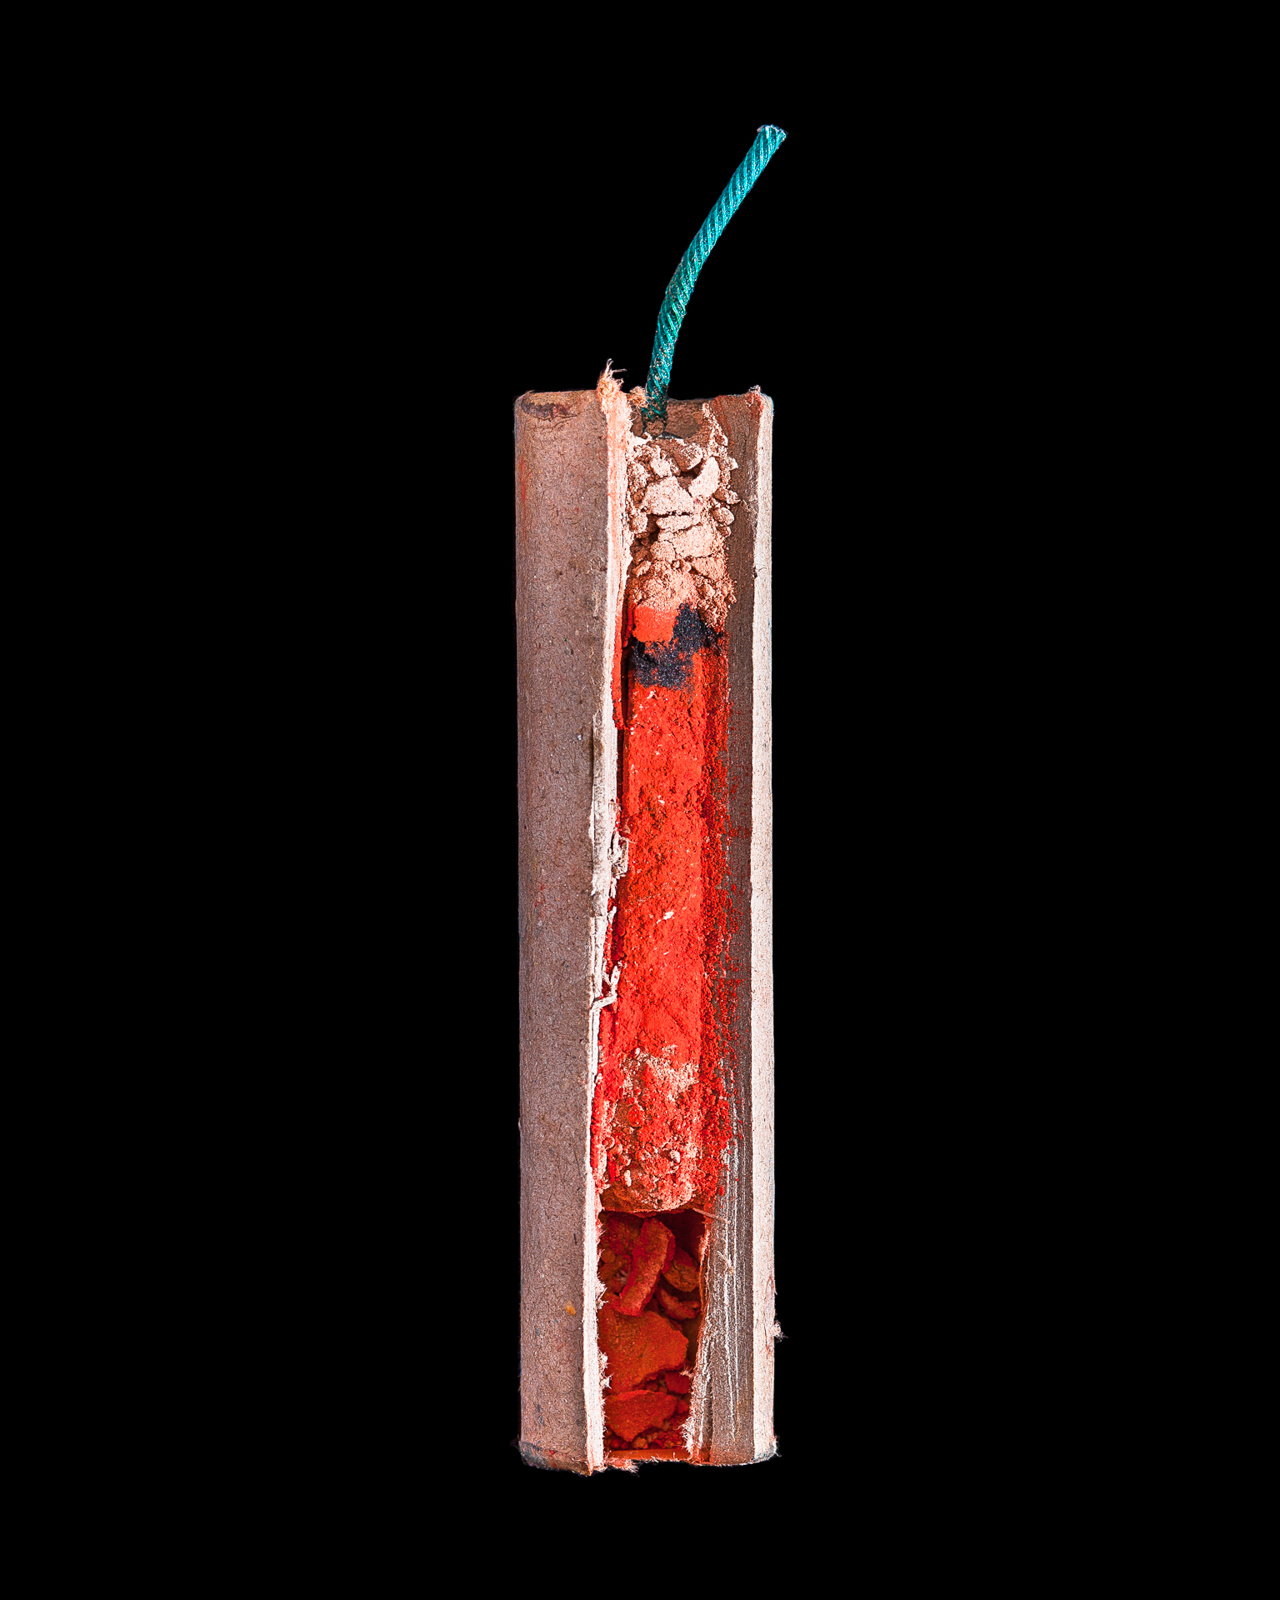 Cross-Section Views Of Firecrackers Are As Cool As Their Explosions